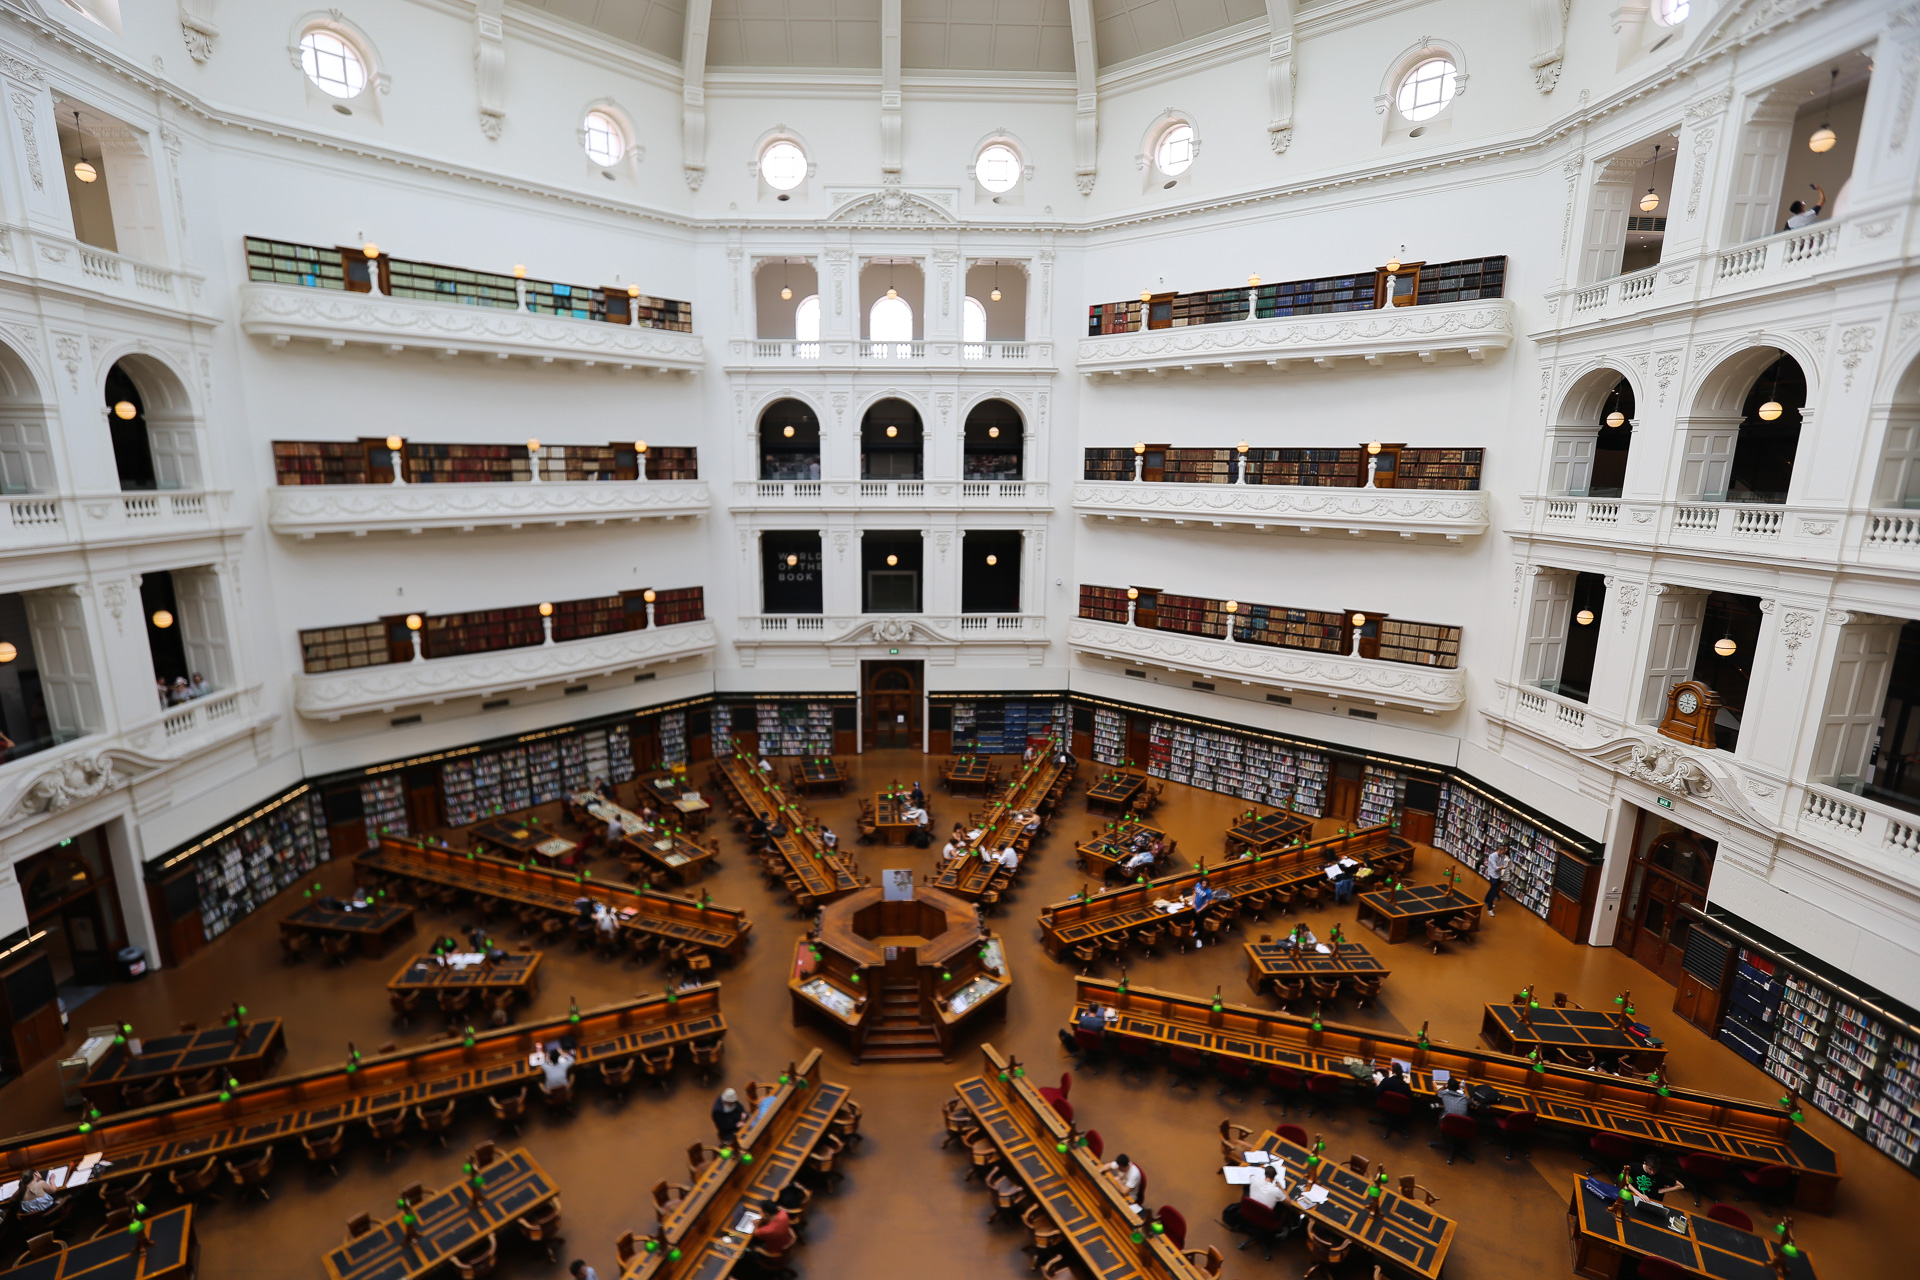 State Library of Victoria Melbourne